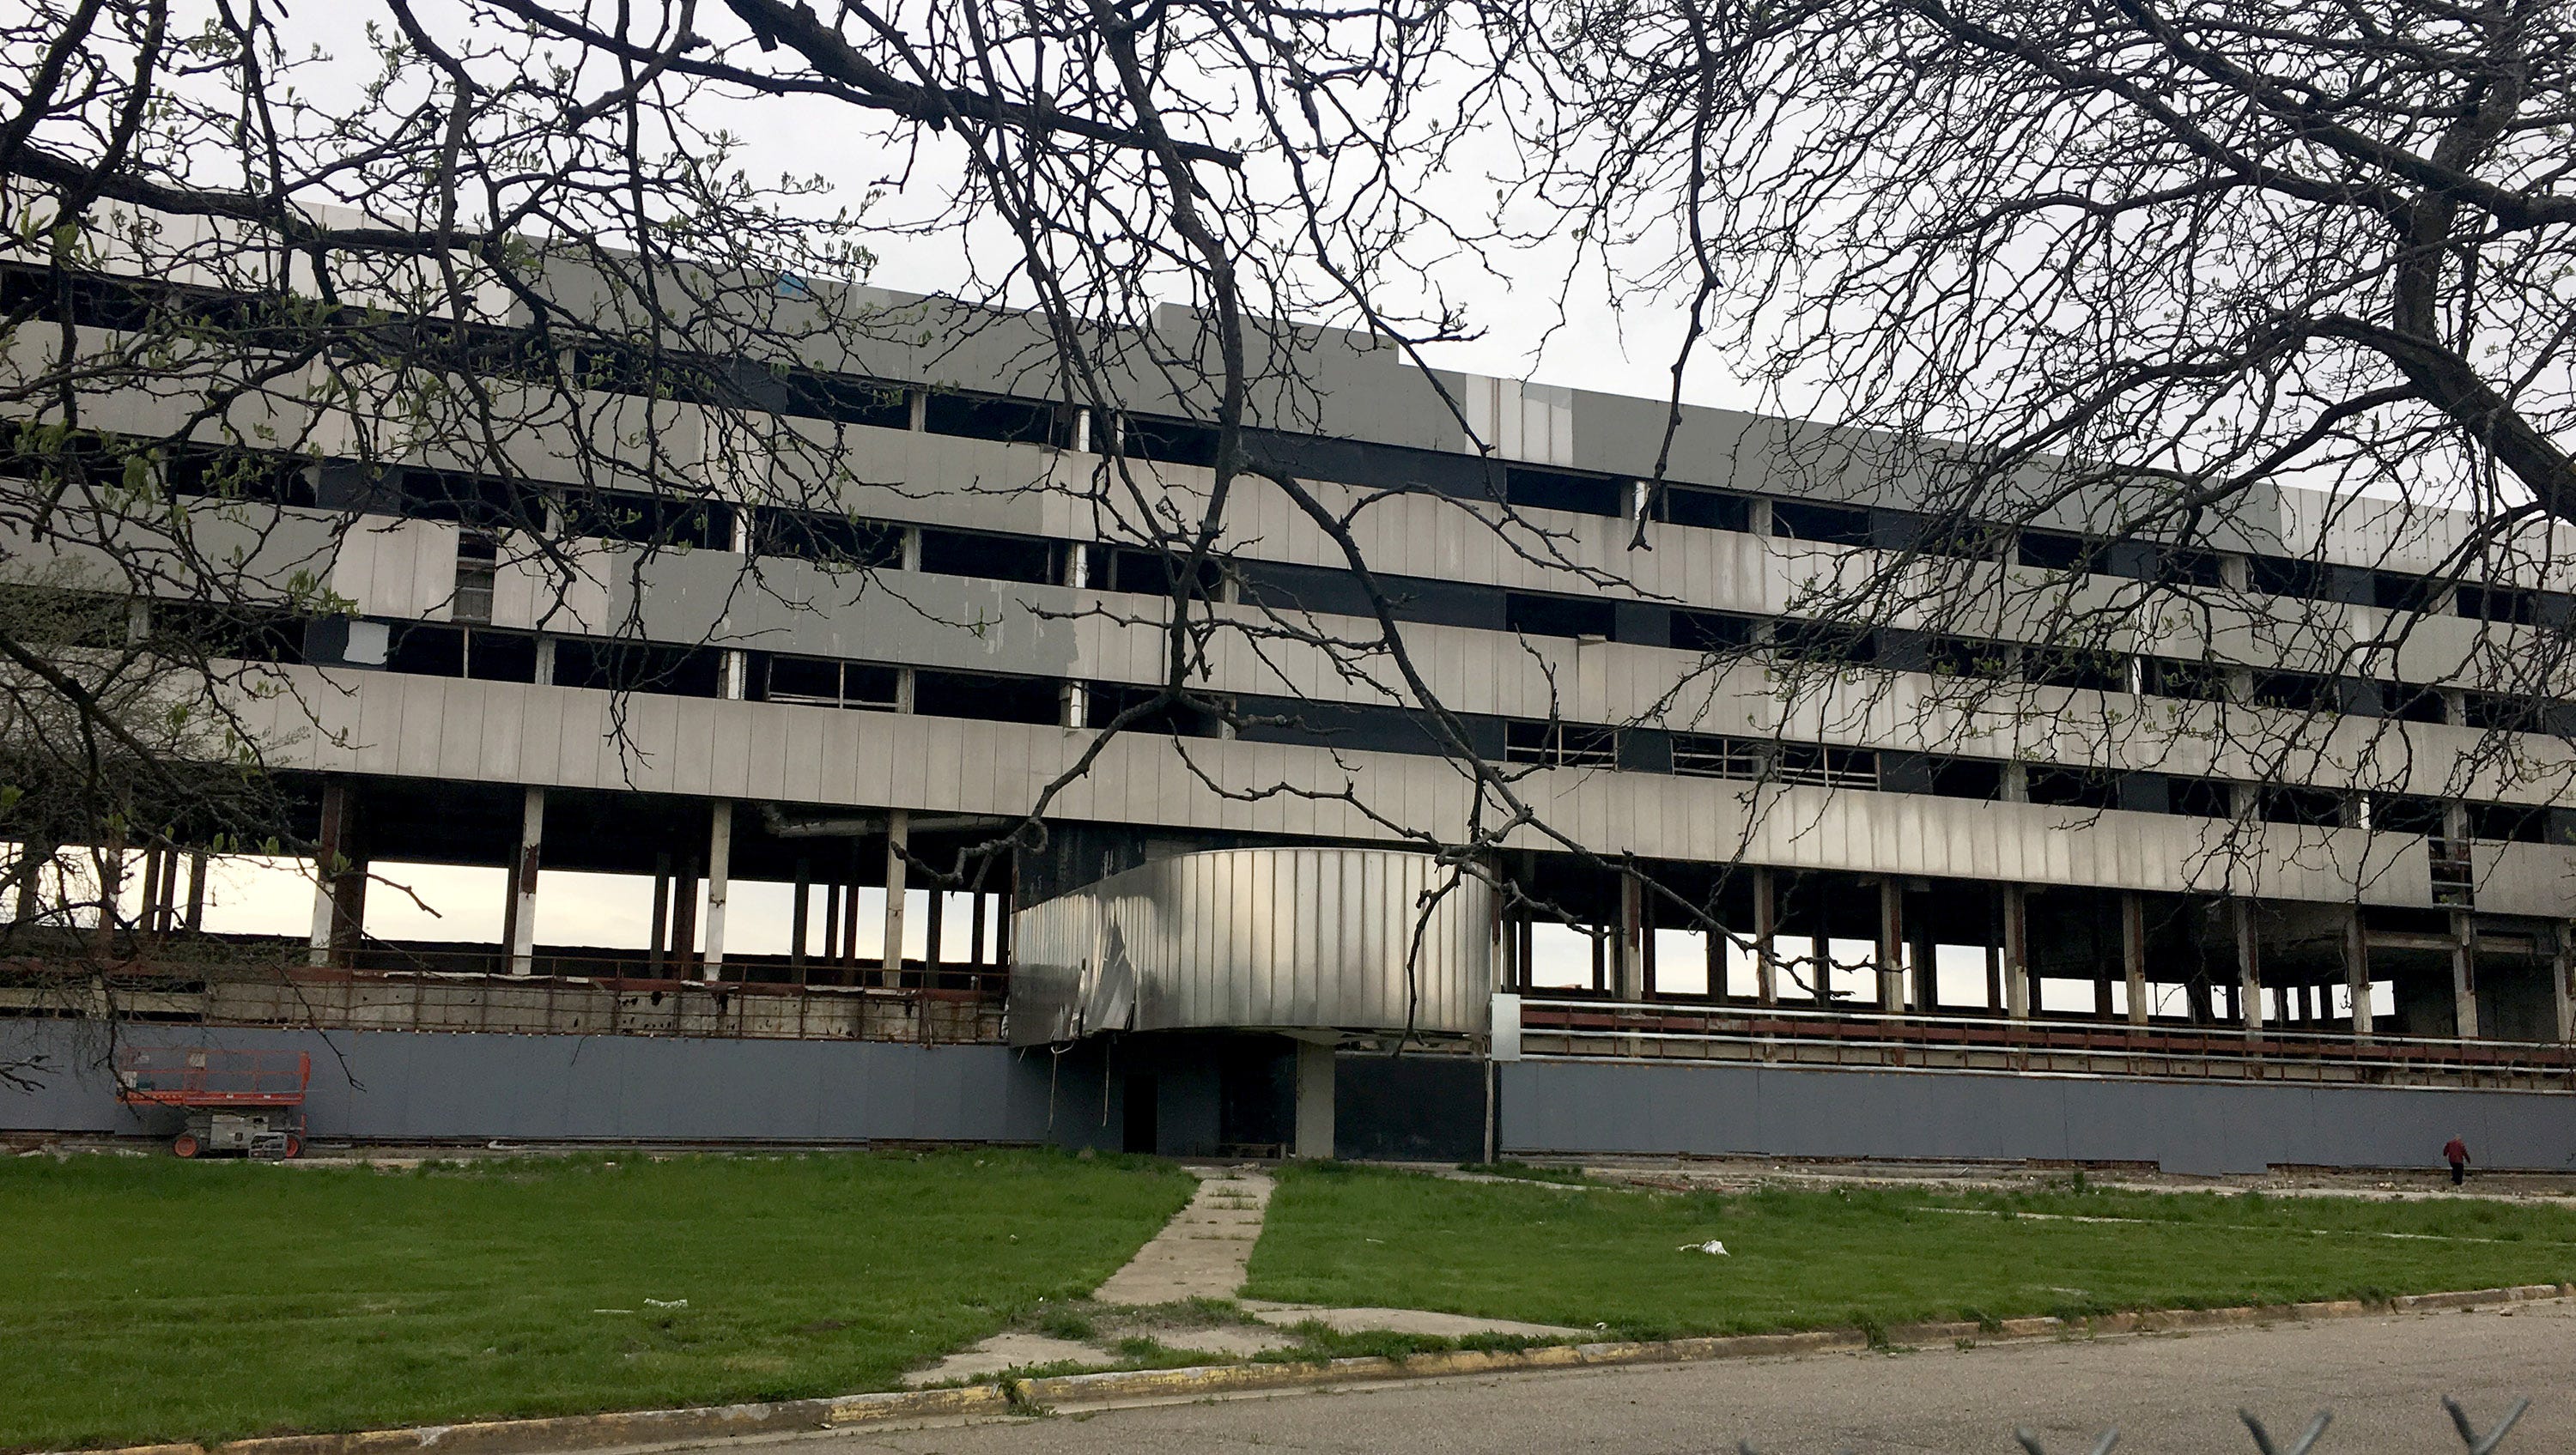 Detroit City FC acquires abandoned hospital site for future soccer stadium